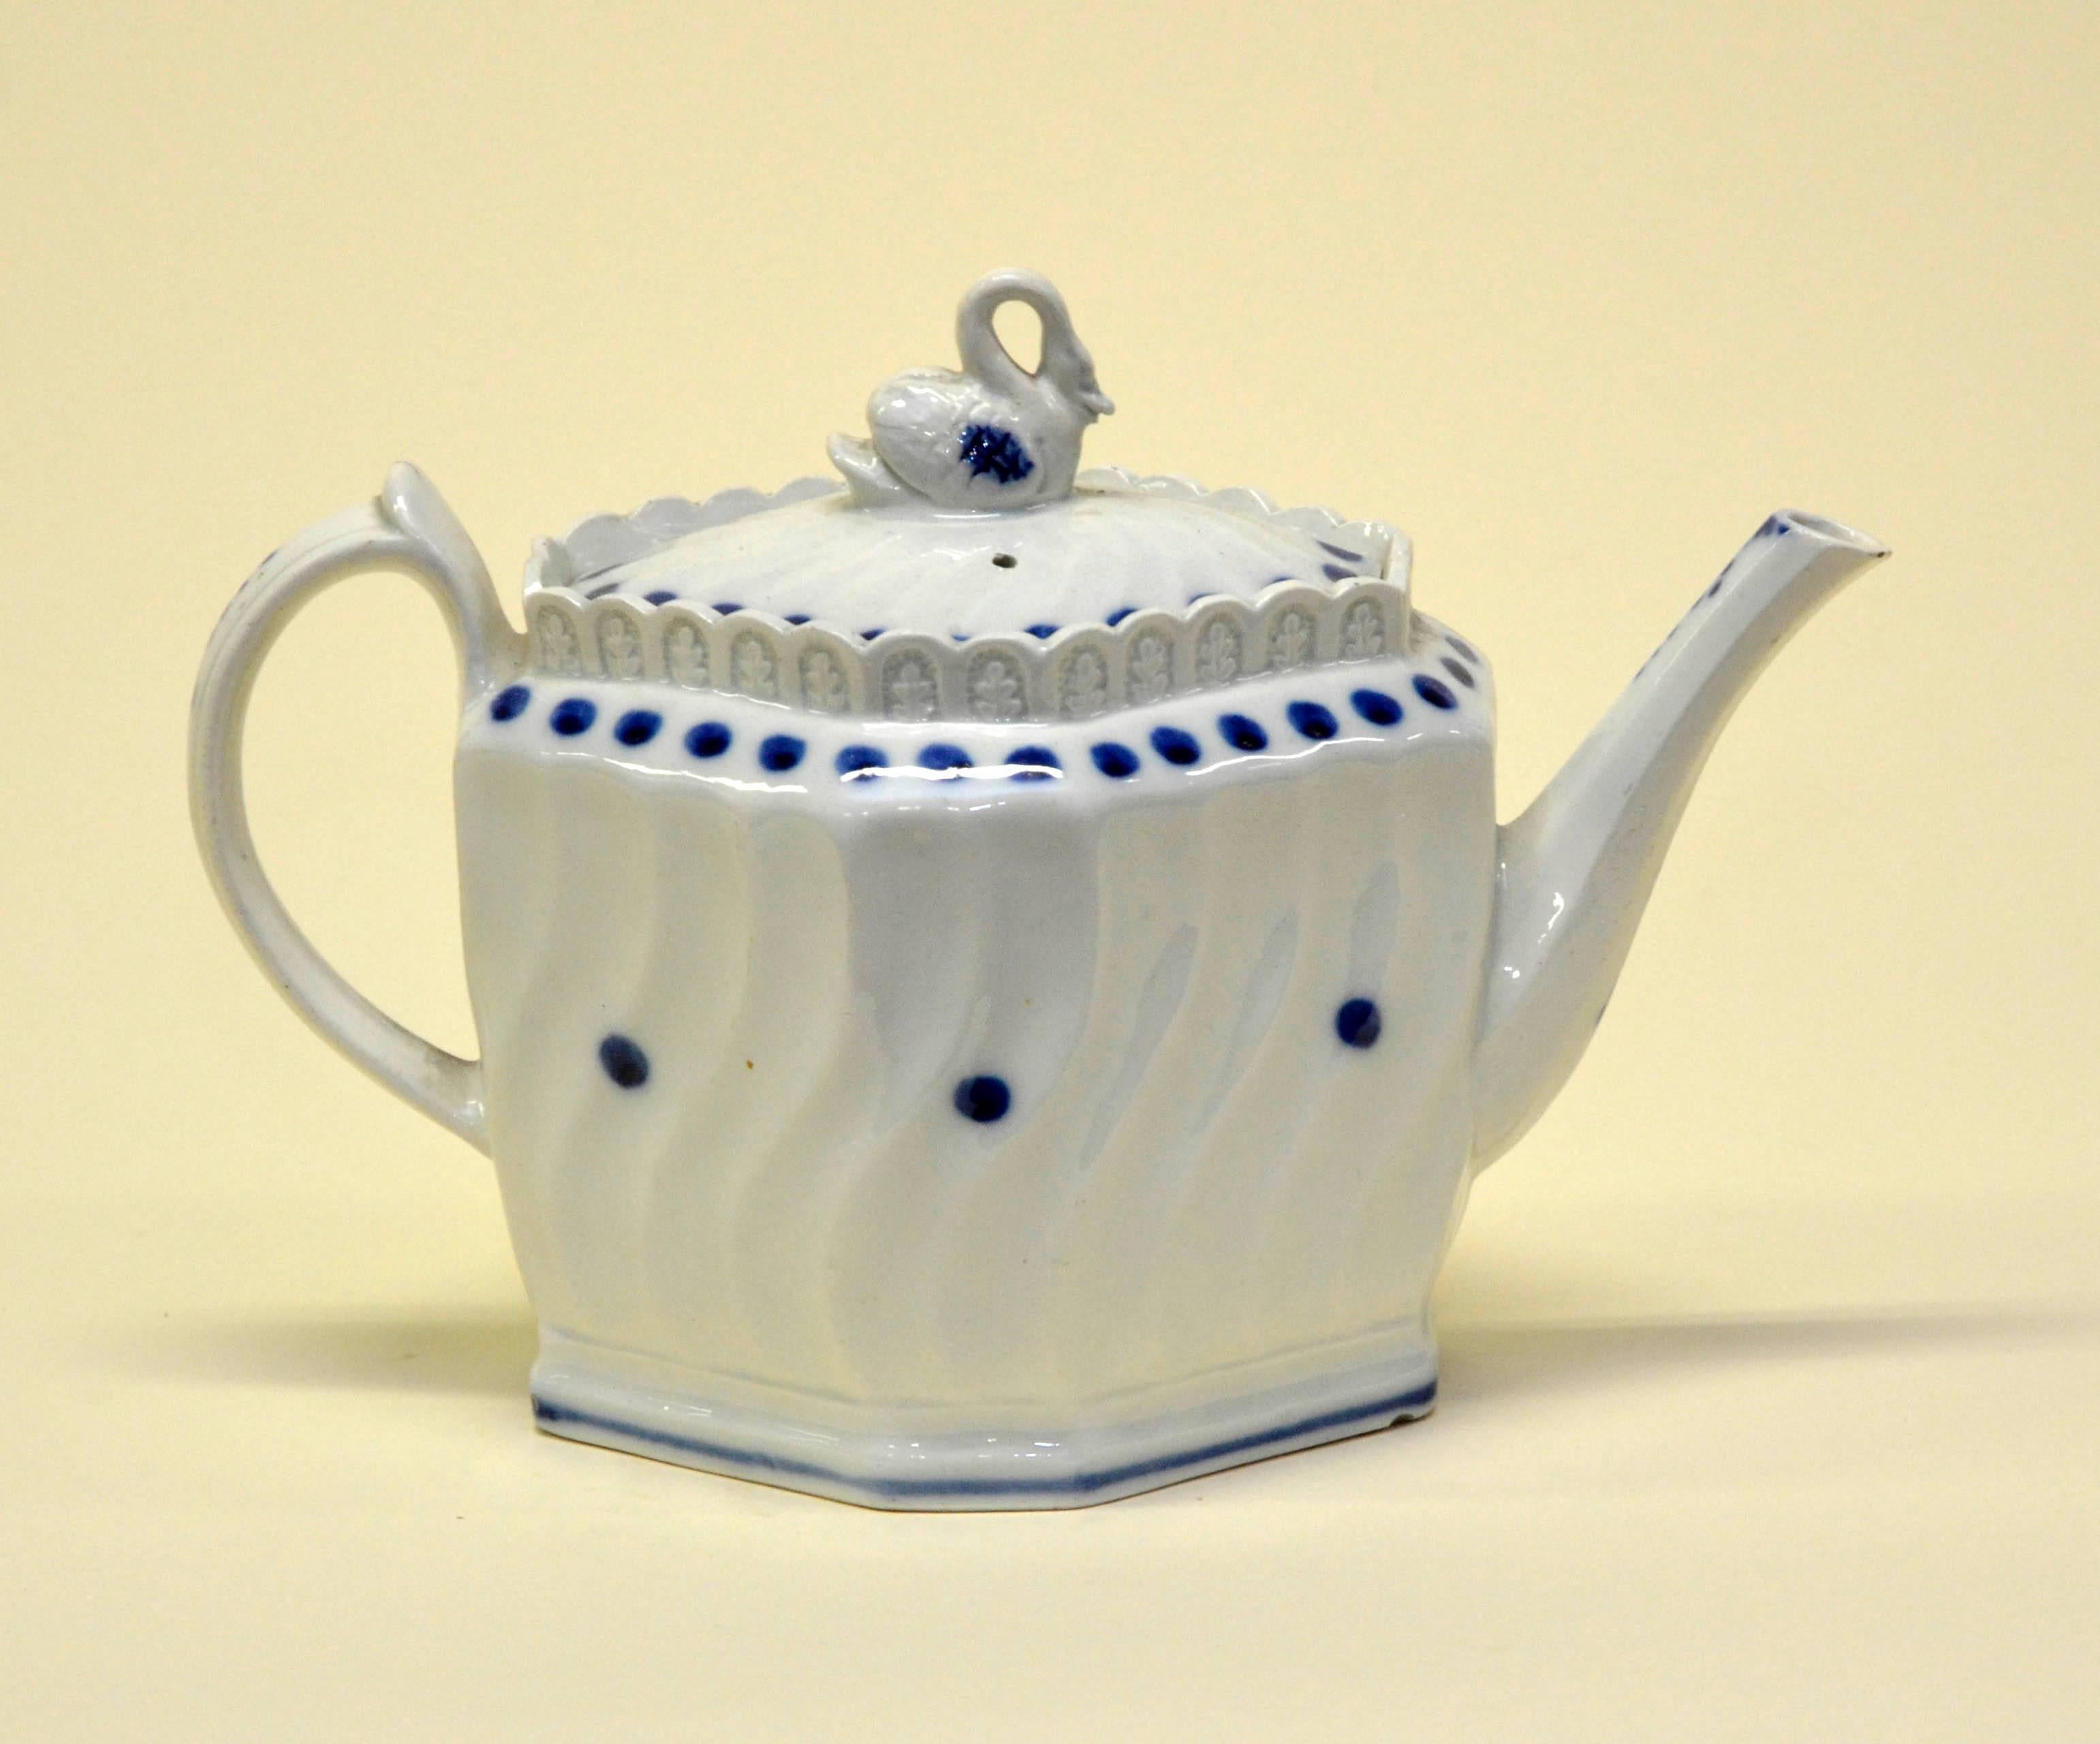 Early 1800 English possibly Thomas Harley blue and white octagonal lead-glazed earthenware teapot with swan finial.

Swan finial has been restored.

 